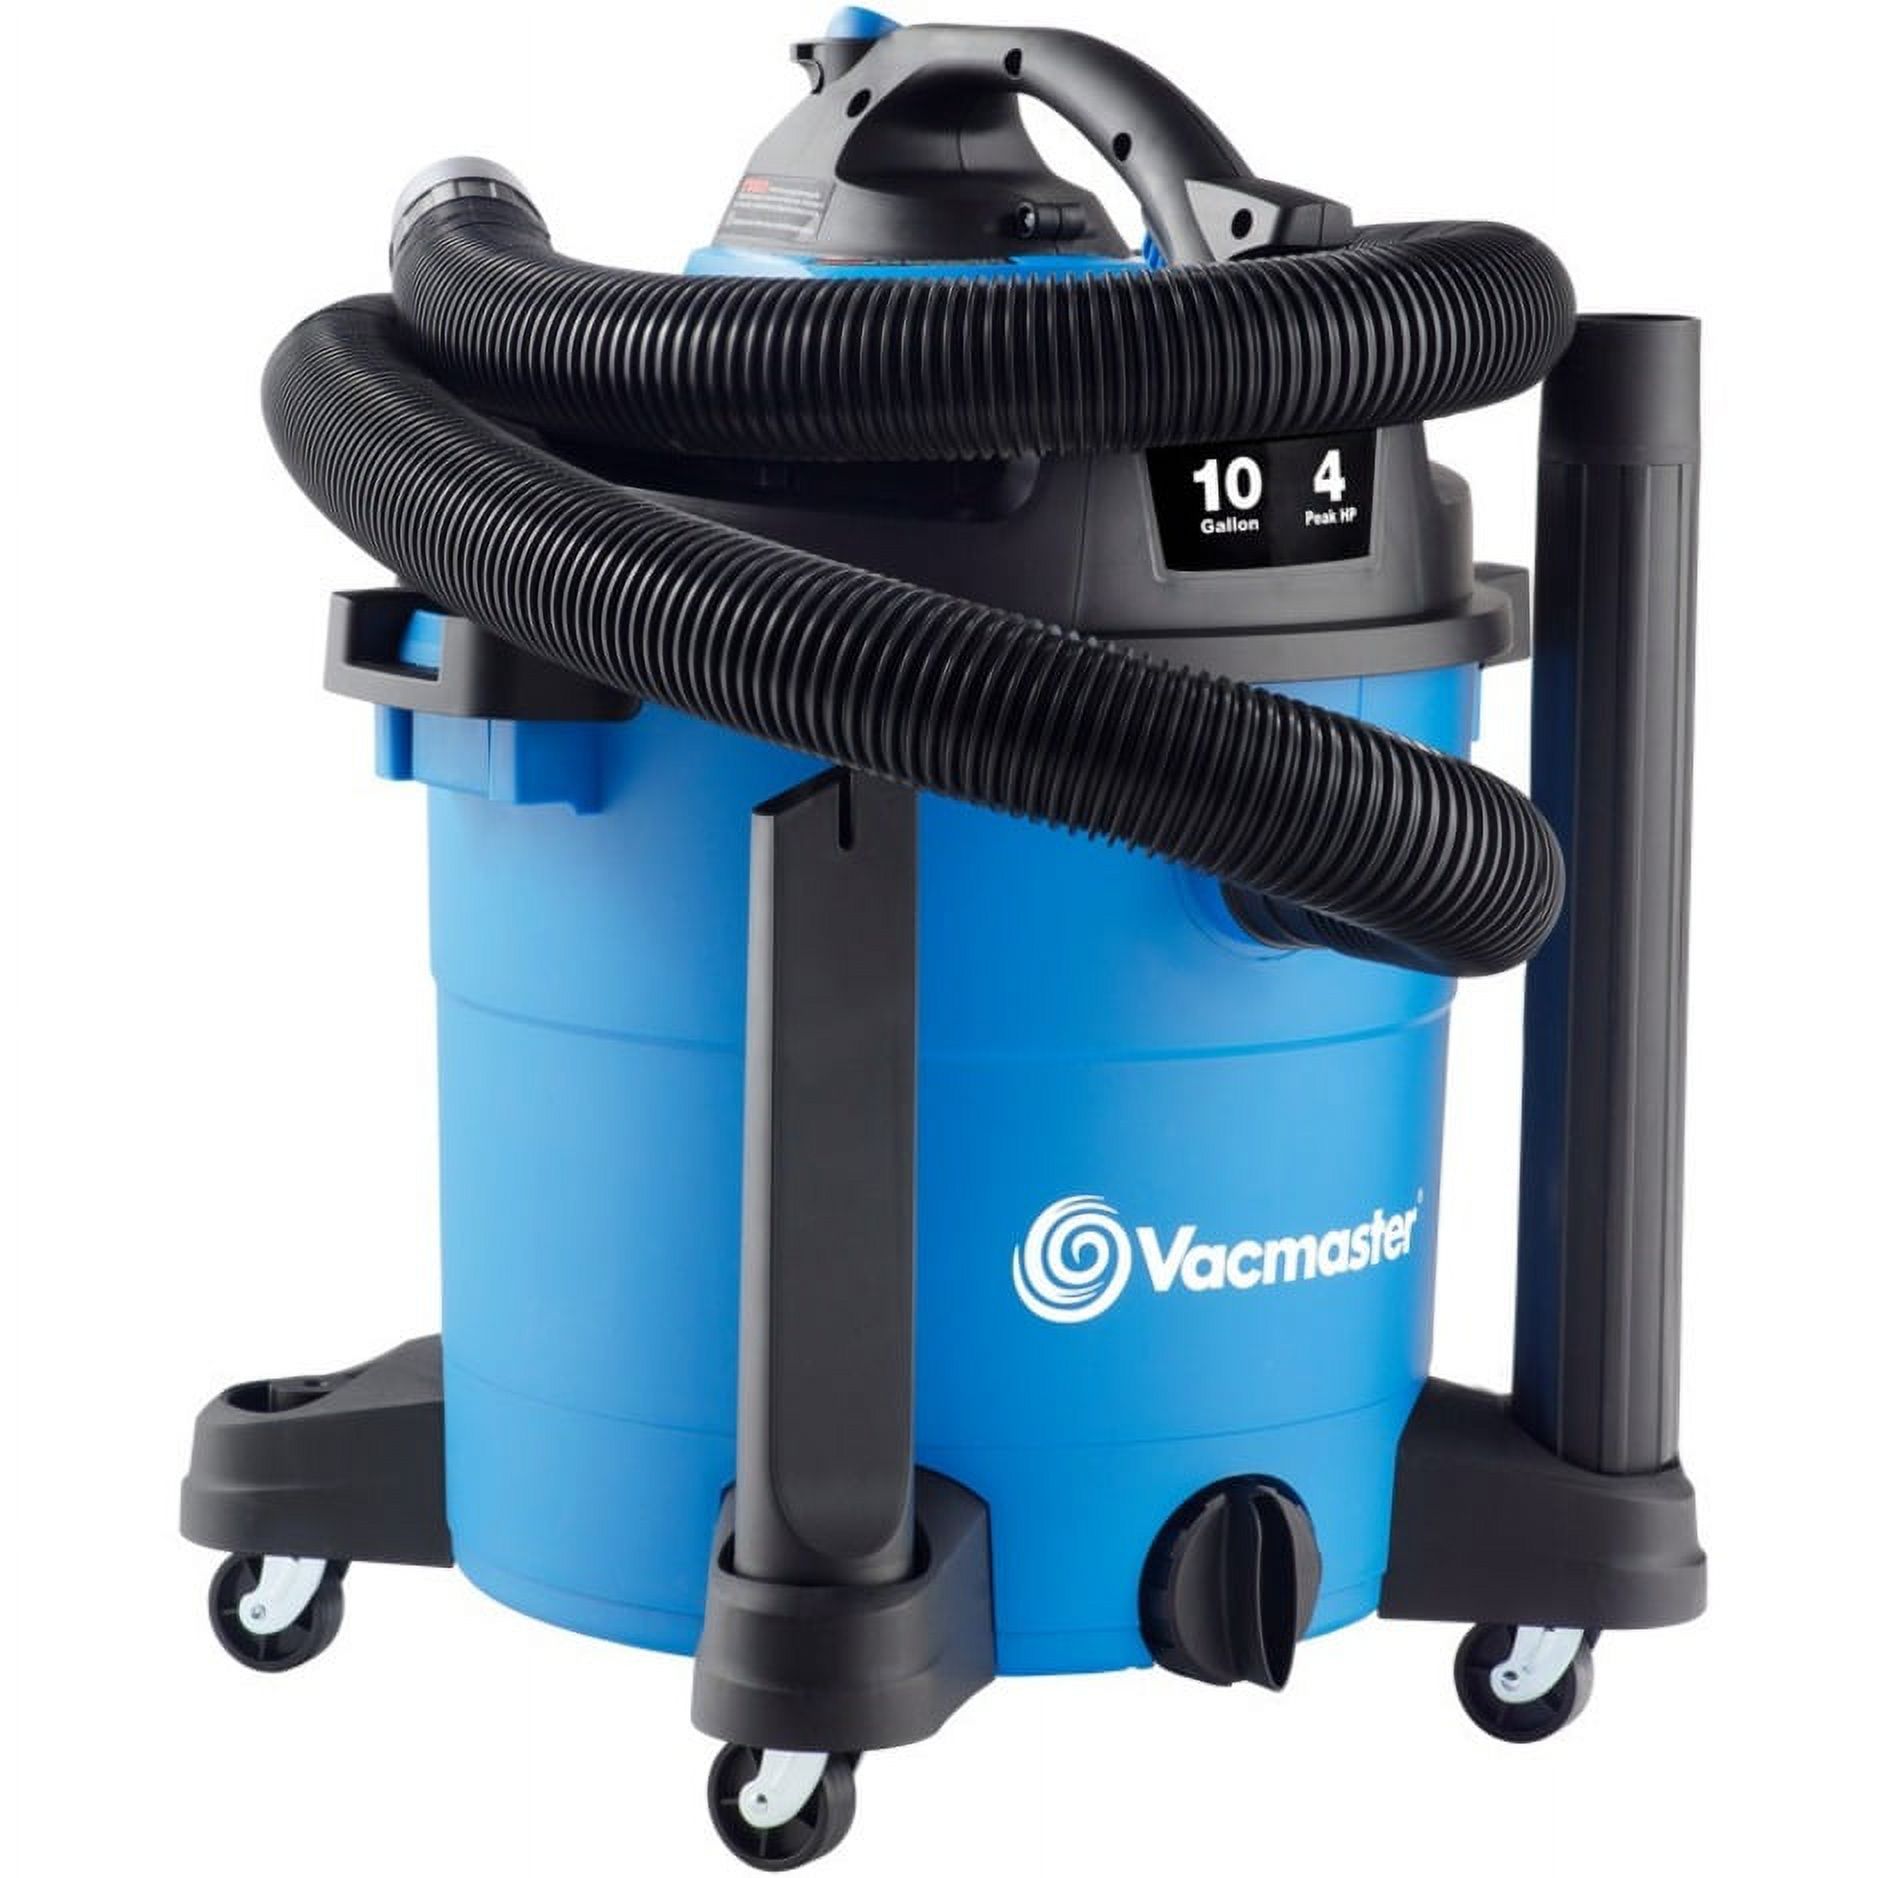 Vacmaster 10 Gallon 4 Peak HP 2 in 1 Wet/Dry Vacuum with Detachable Blower - image 3 of 13